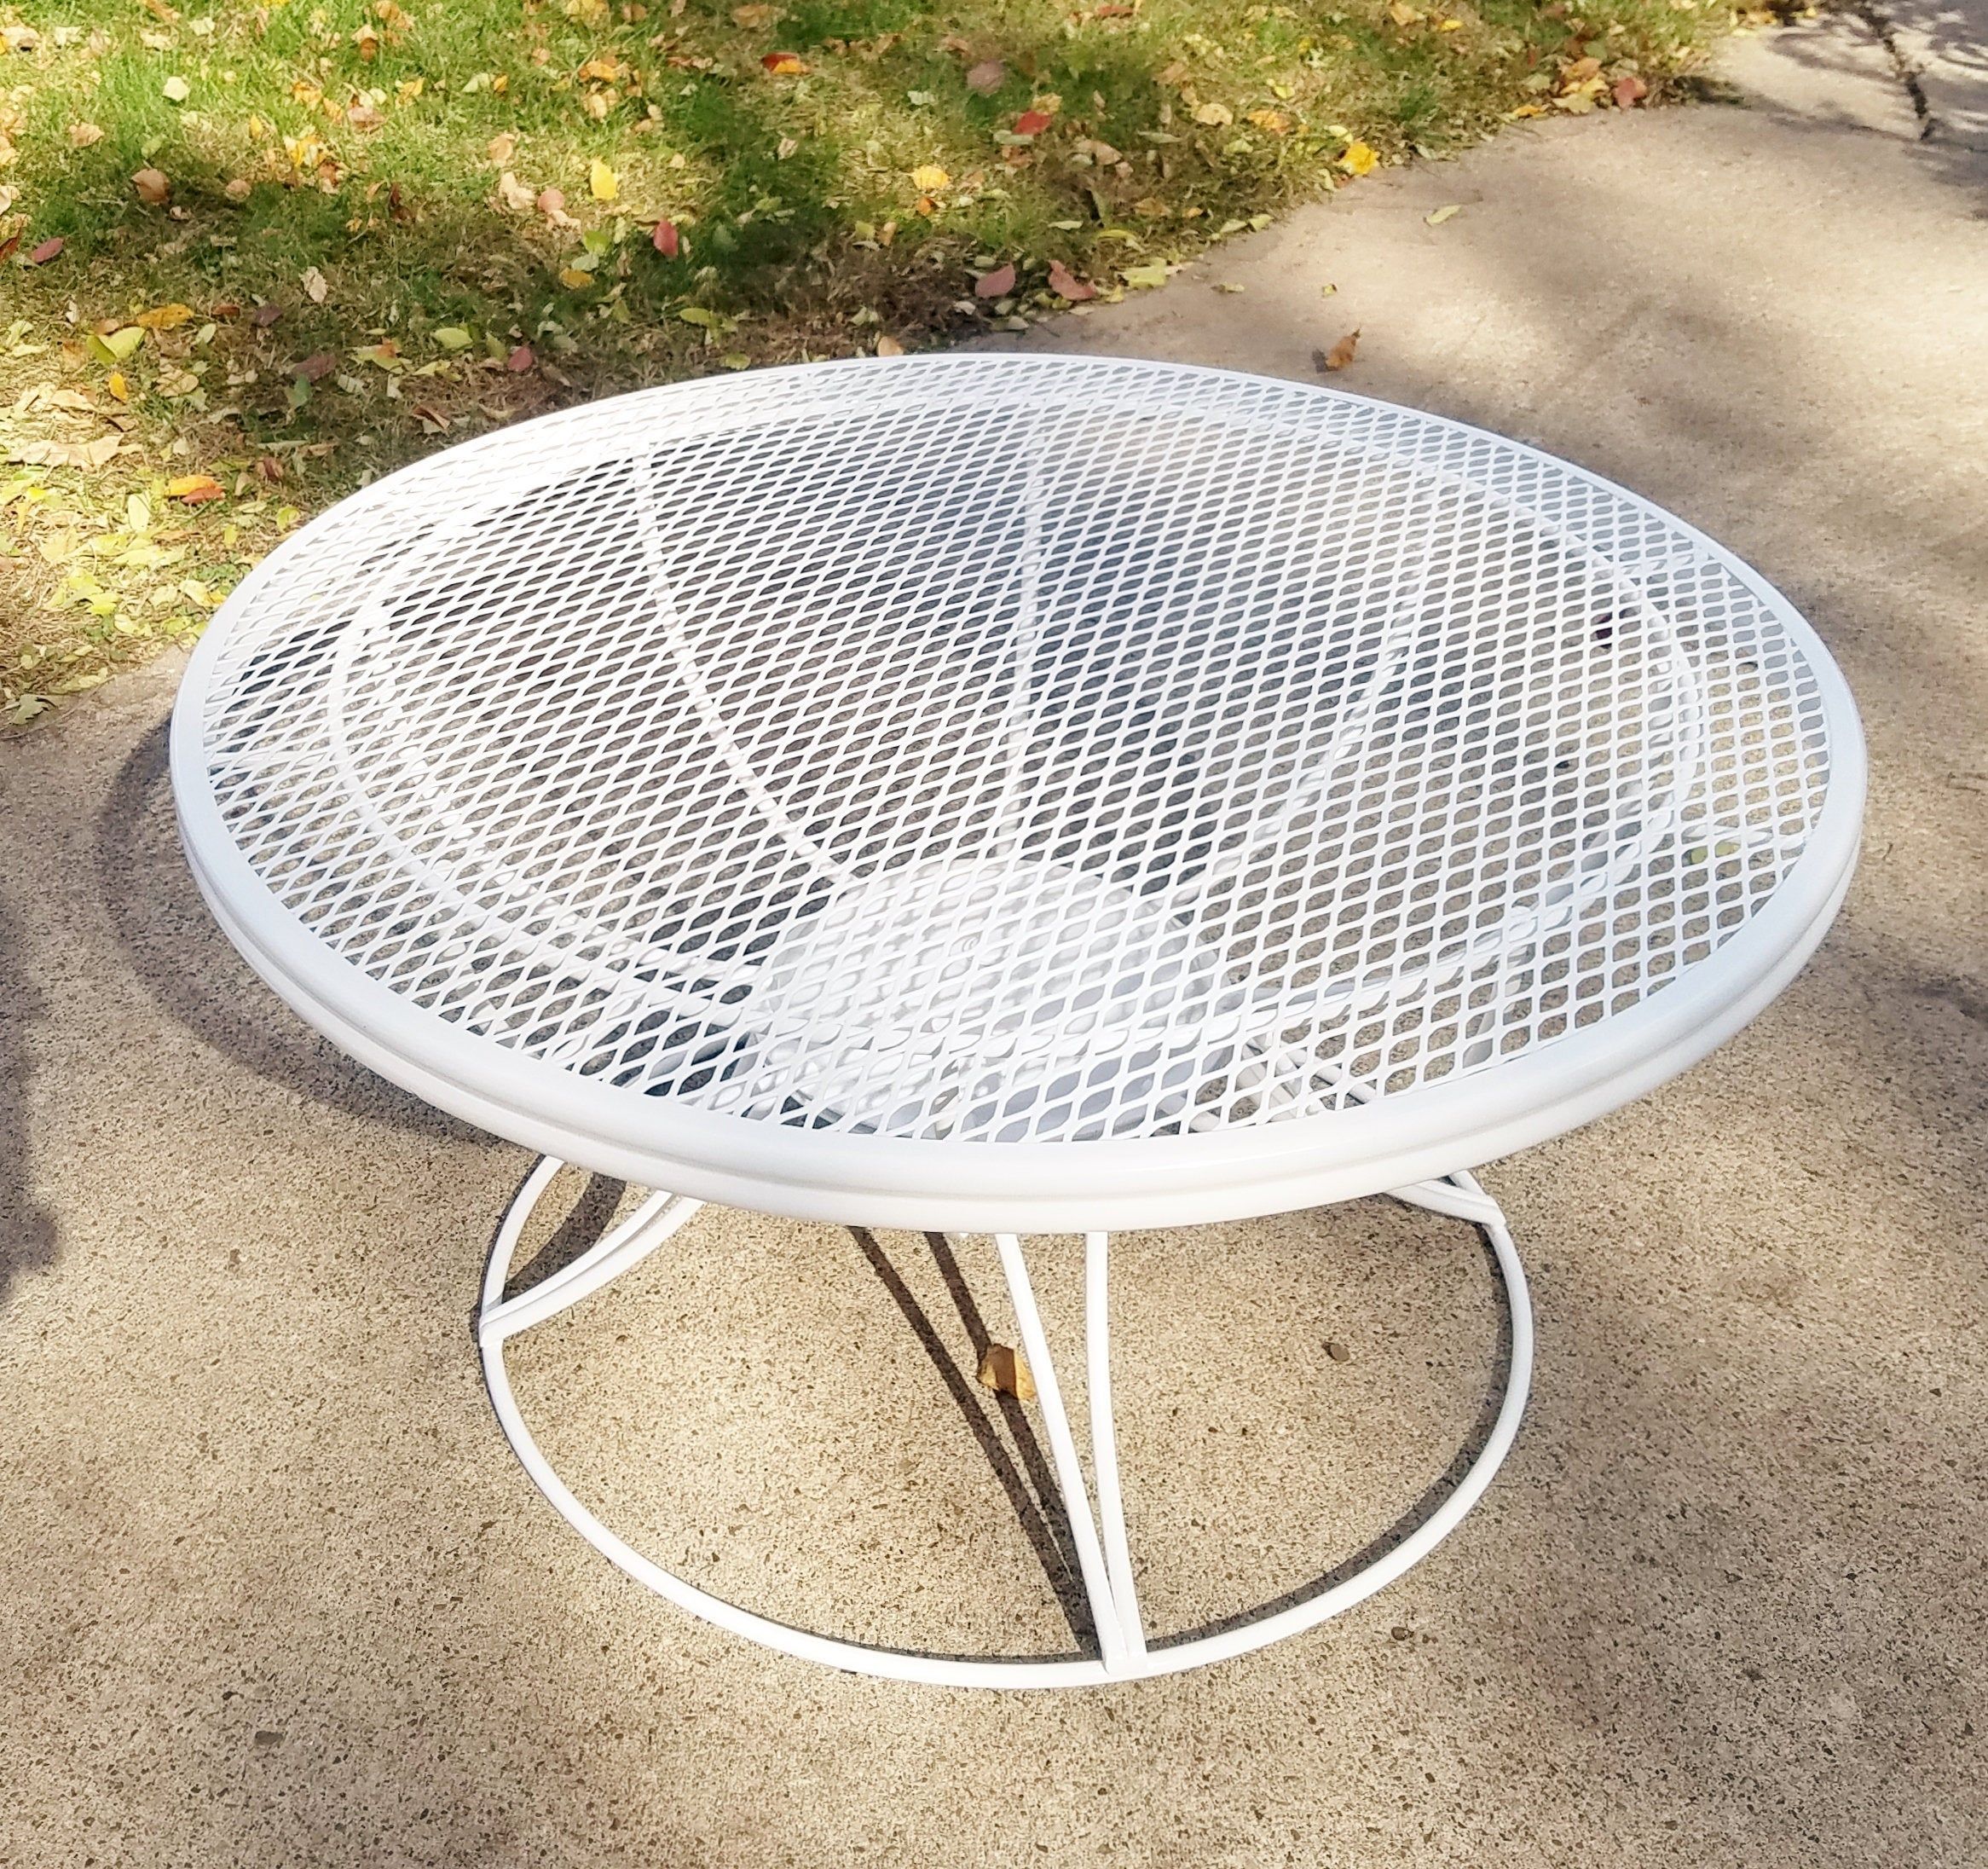 60's Homecrest Wire Table Eames Era Round Coffee Table | Etsy | Metal With Regard To Round Steel Patio Coffee Tables (Gallery 9 of 20)